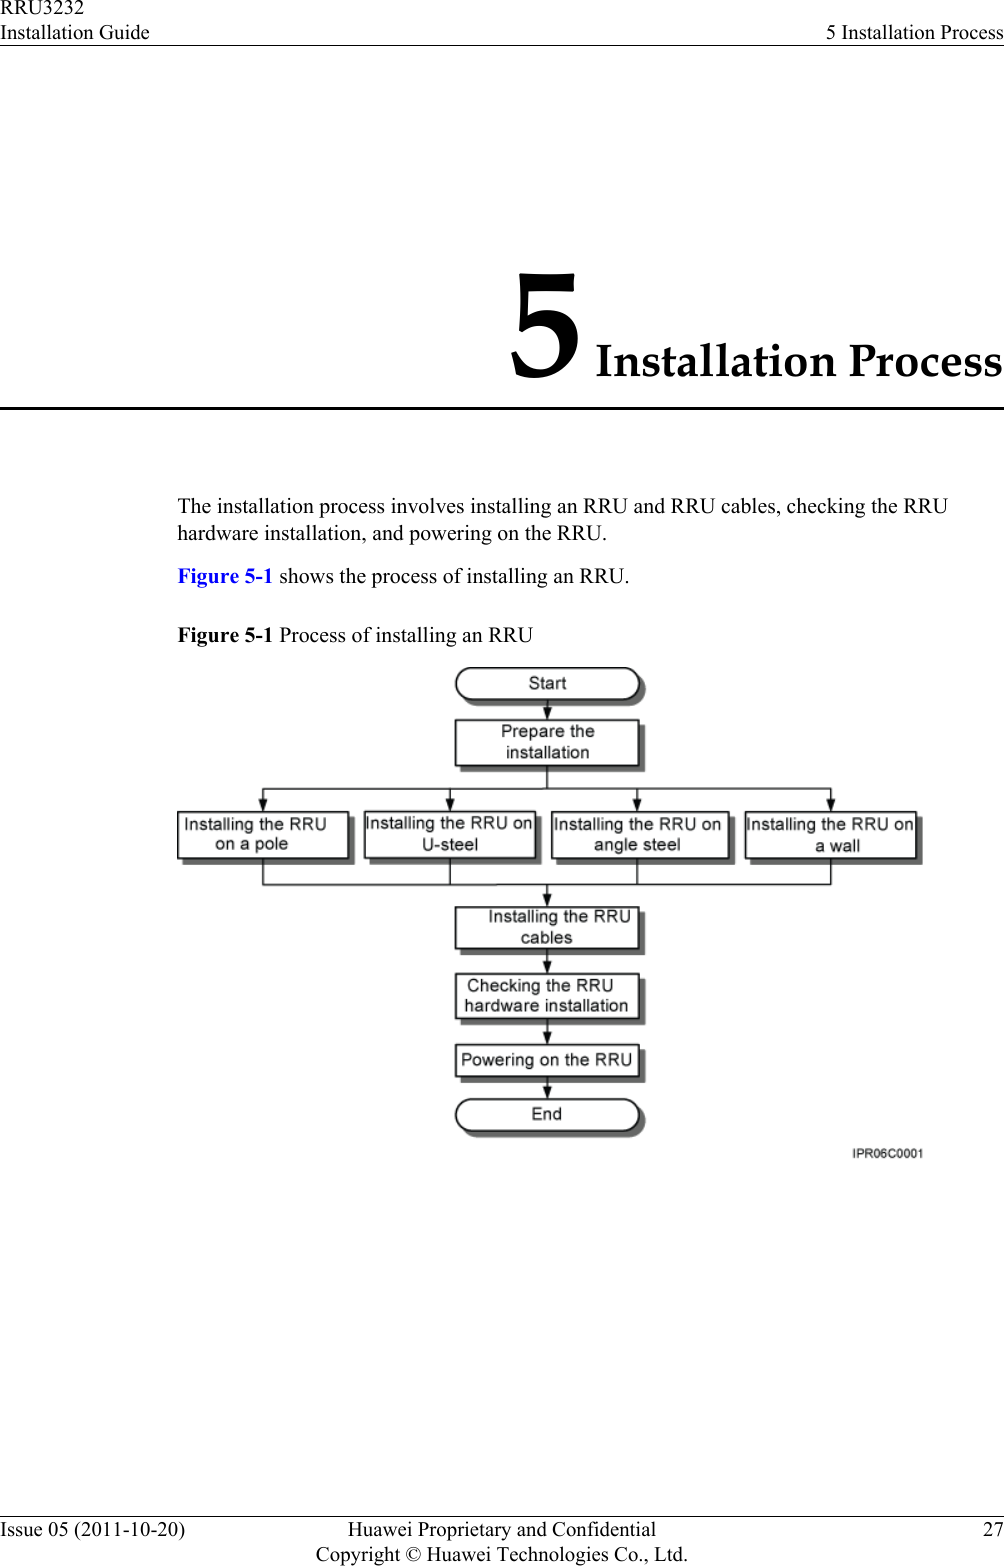 5 Installation ProcessThe installation process involves installing an RRU and RRU cables, checking the RRUhardware installation, and powering on the RRU.Figure 5-1 shows the process of installing an RRU.Figure 5-1 Process of installing an RRURRU3232Installation Guide 5 Installation ProcessIssue 05 (2011-10-20) Huawei Proprietary and ConfidentialCopyright © Huawei Technologies Co., Ltd.27